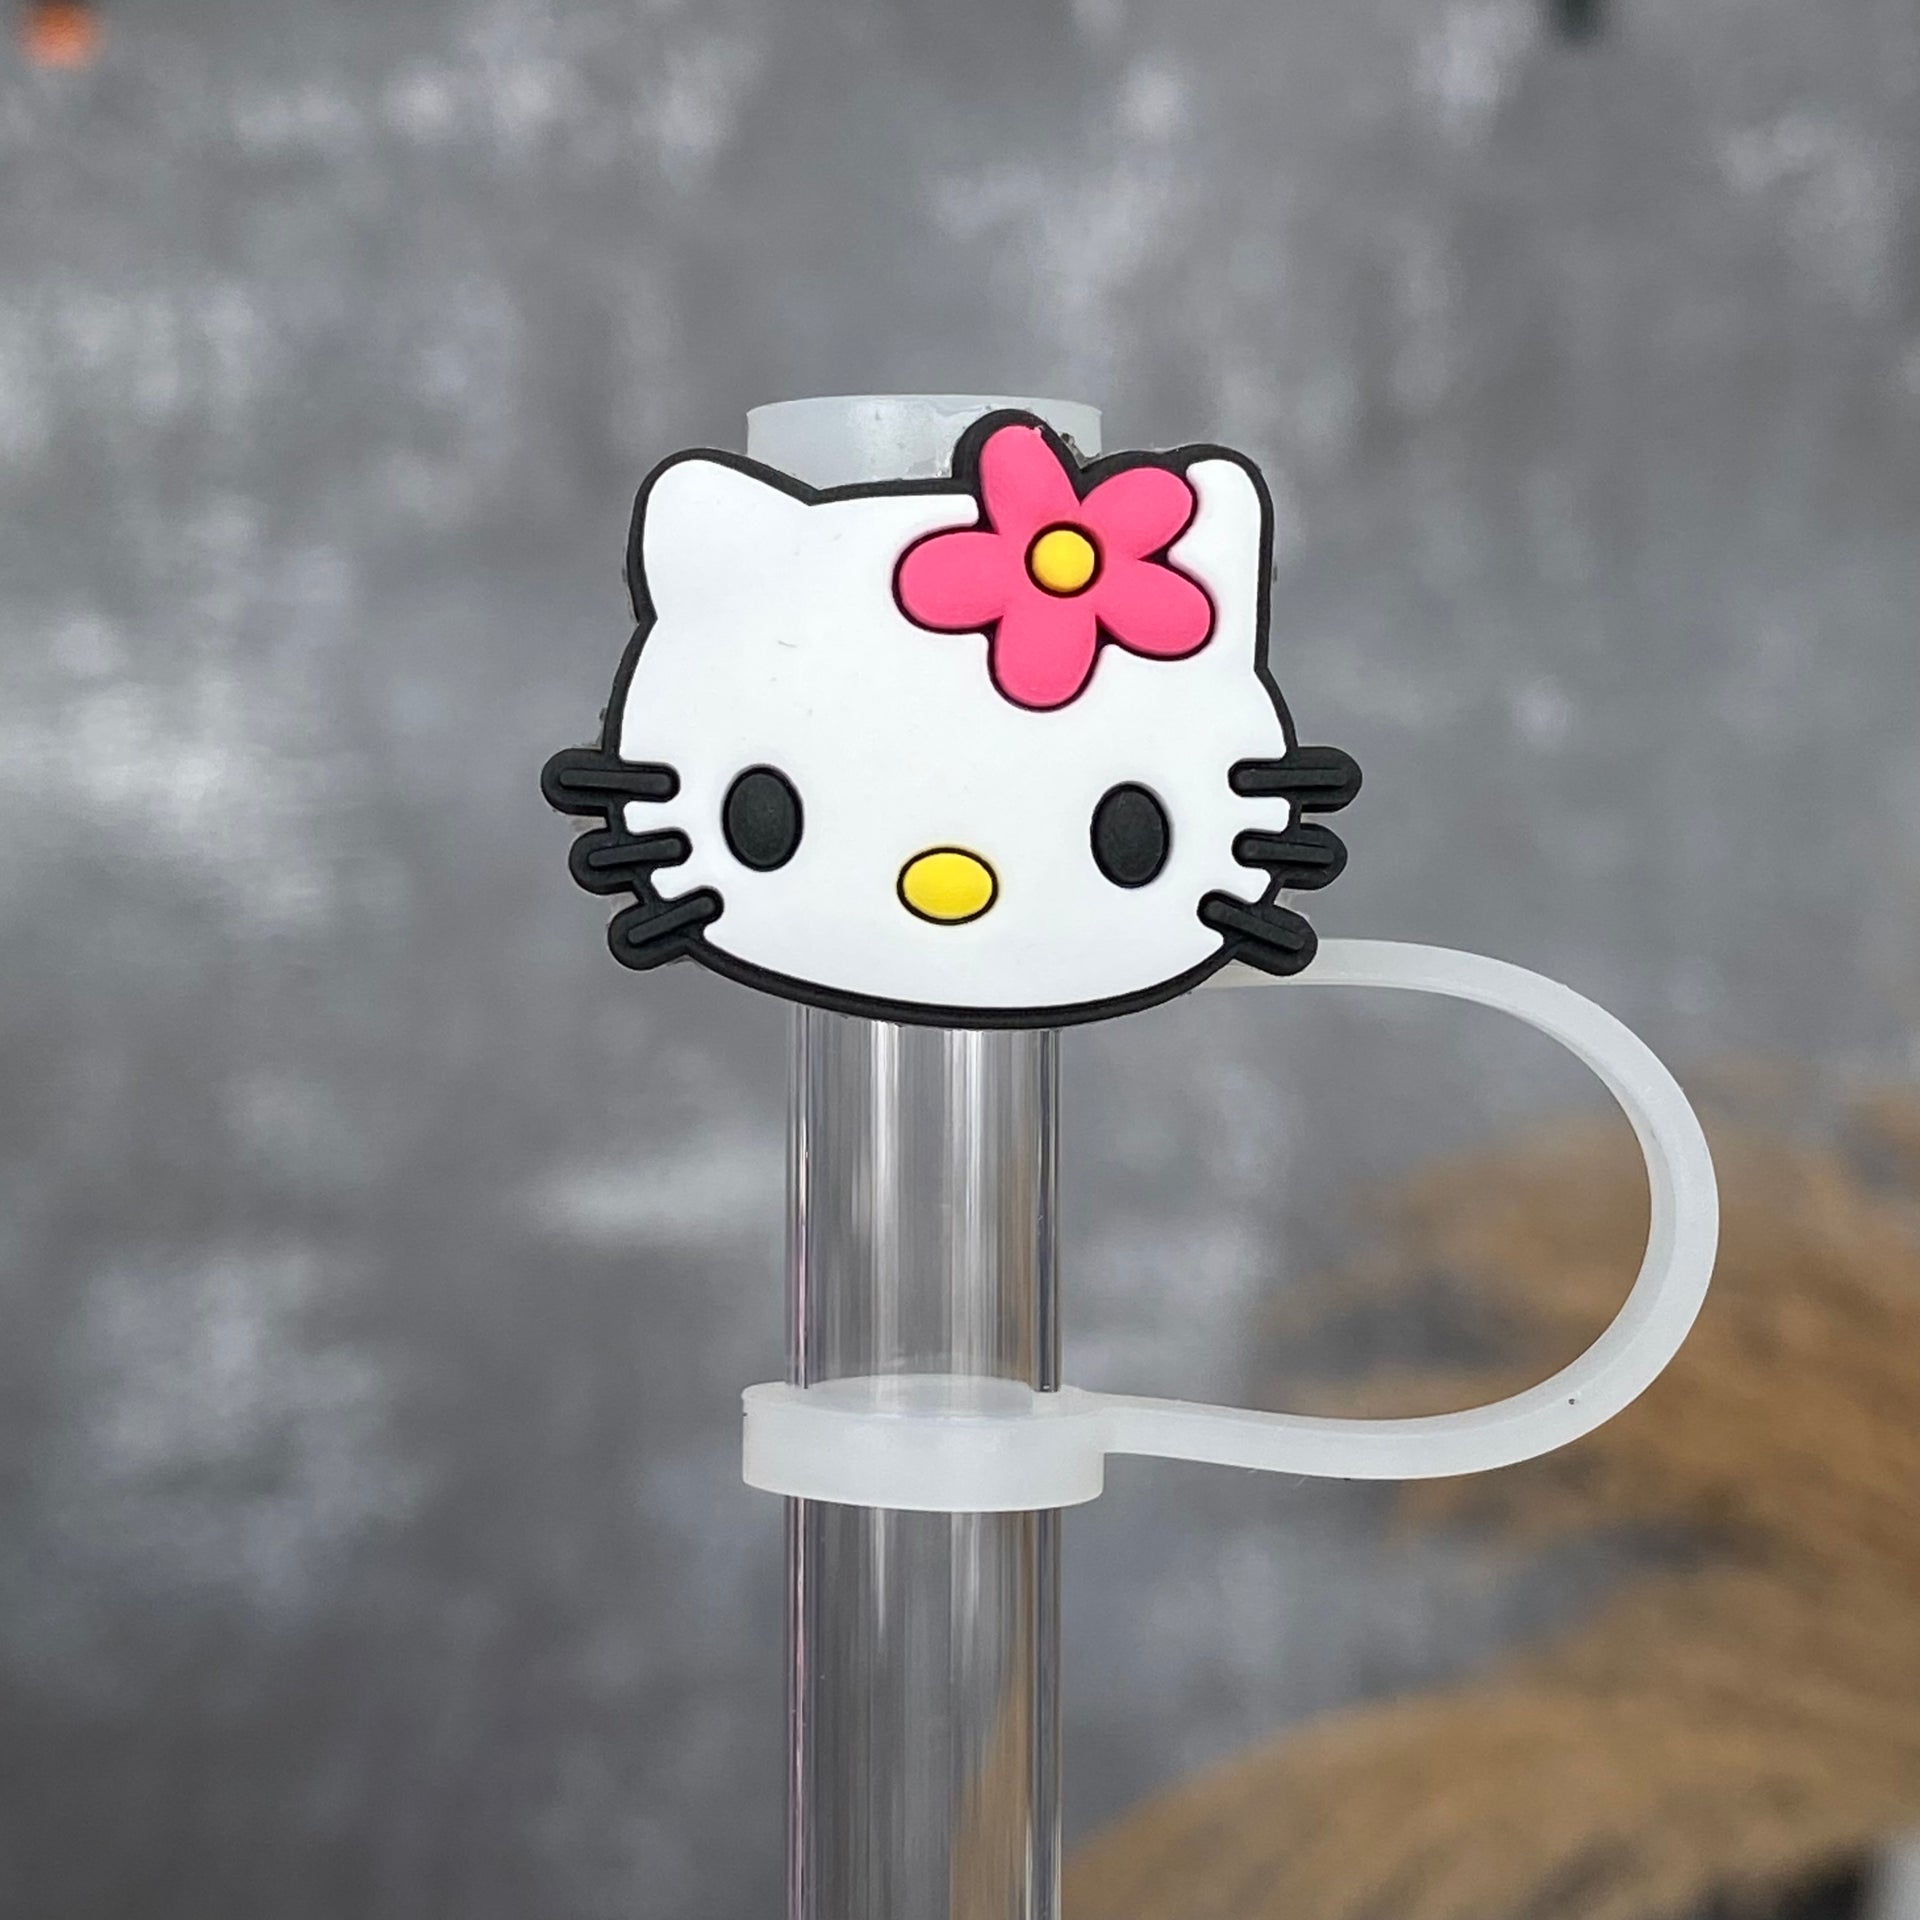 Just Dropped Adorable New Stanley Tumbler Straw Toppers